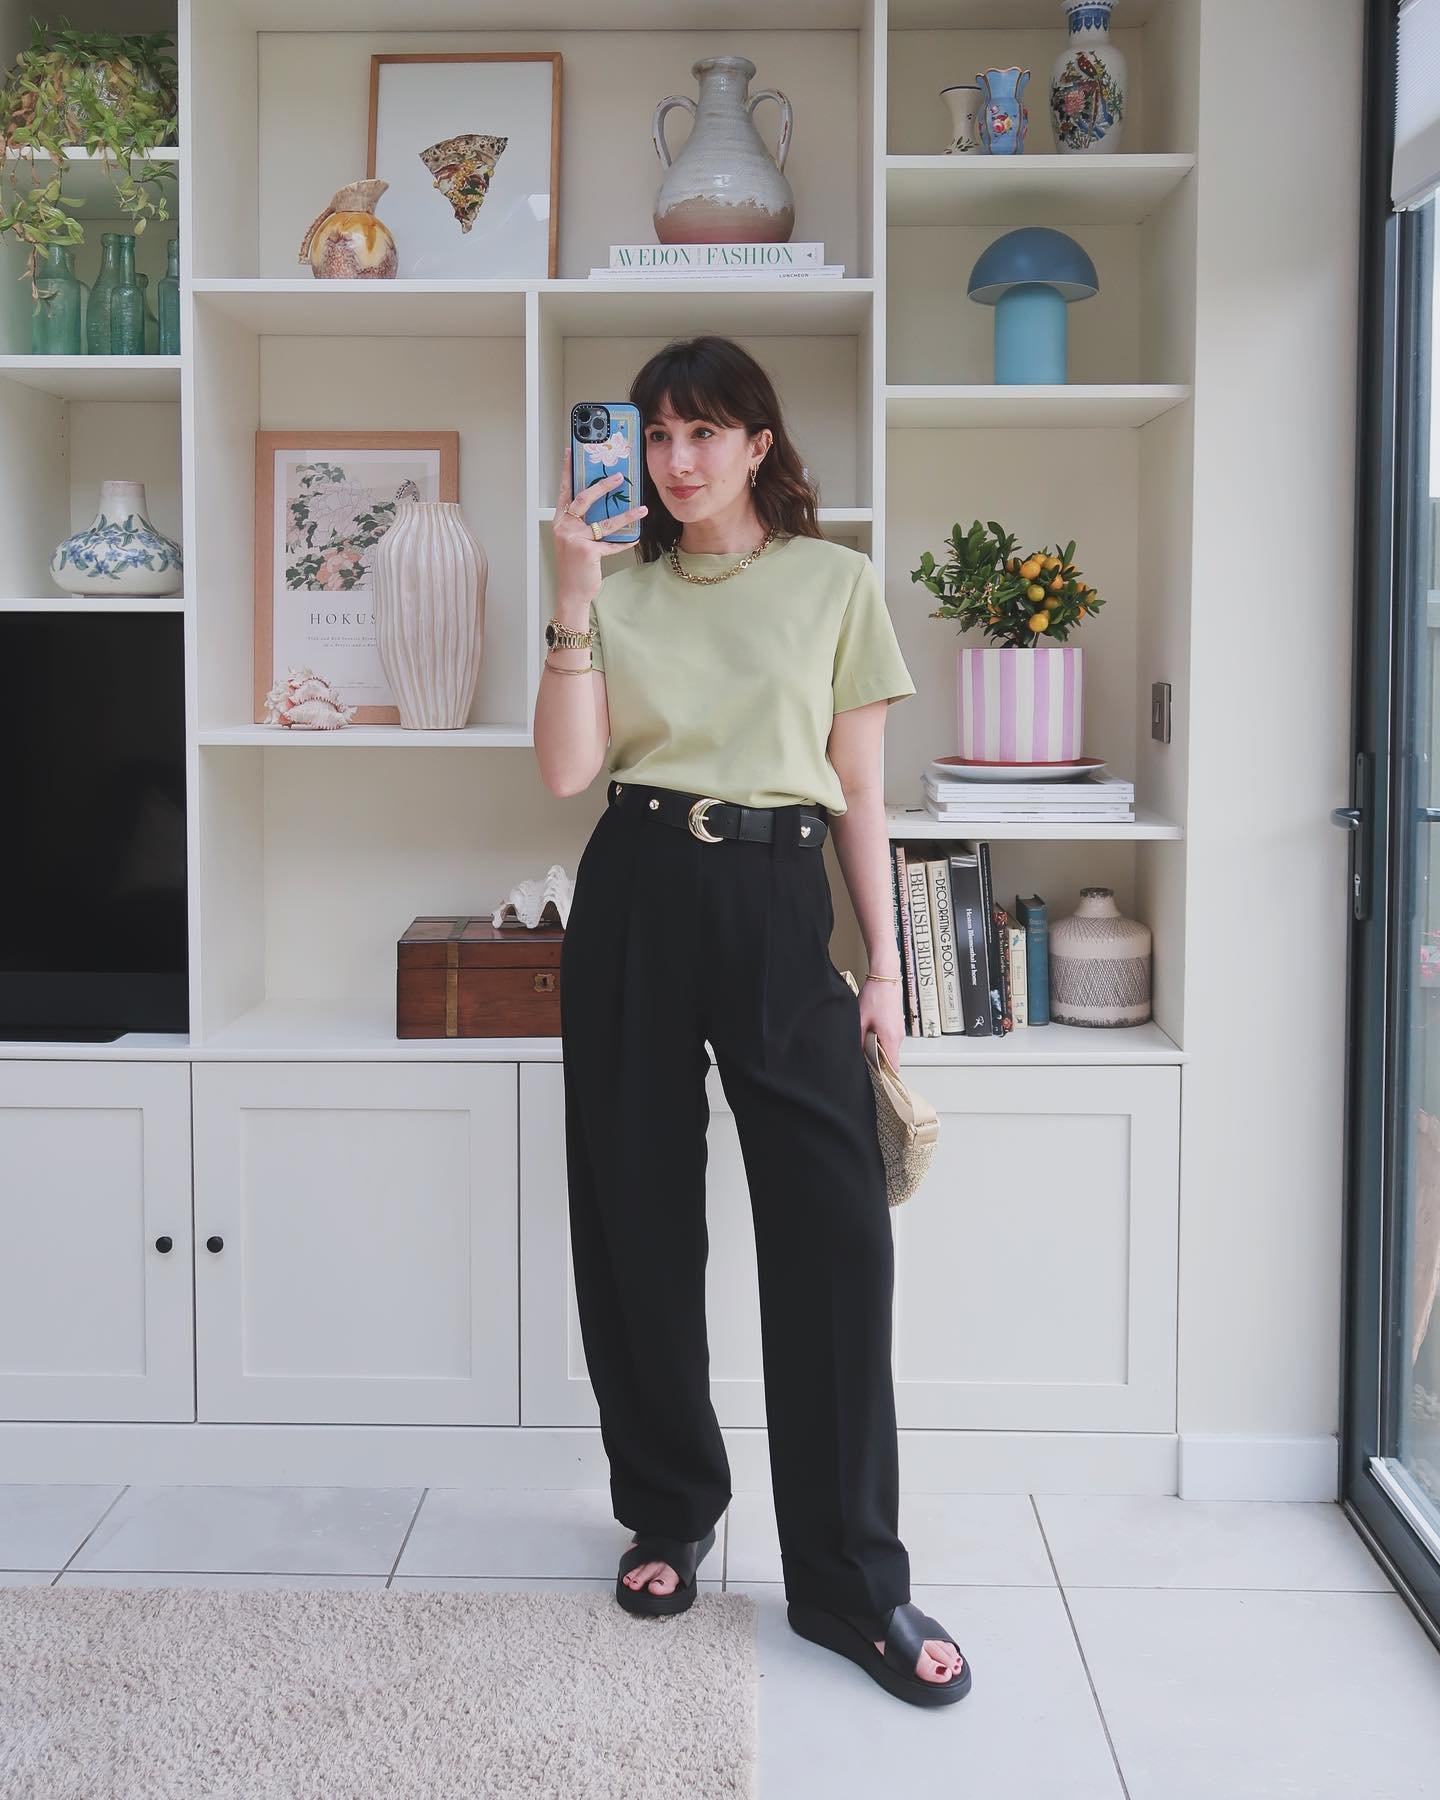 Weekly outfit ideas 💫 the best of basics! This weeks theme is basics! My favourite summer basics.  Which is your fave? I just think you can&rsquo;t go wrong with a black dress, pastel tee, cropped white tee, linen trousers, leather jacket for the co